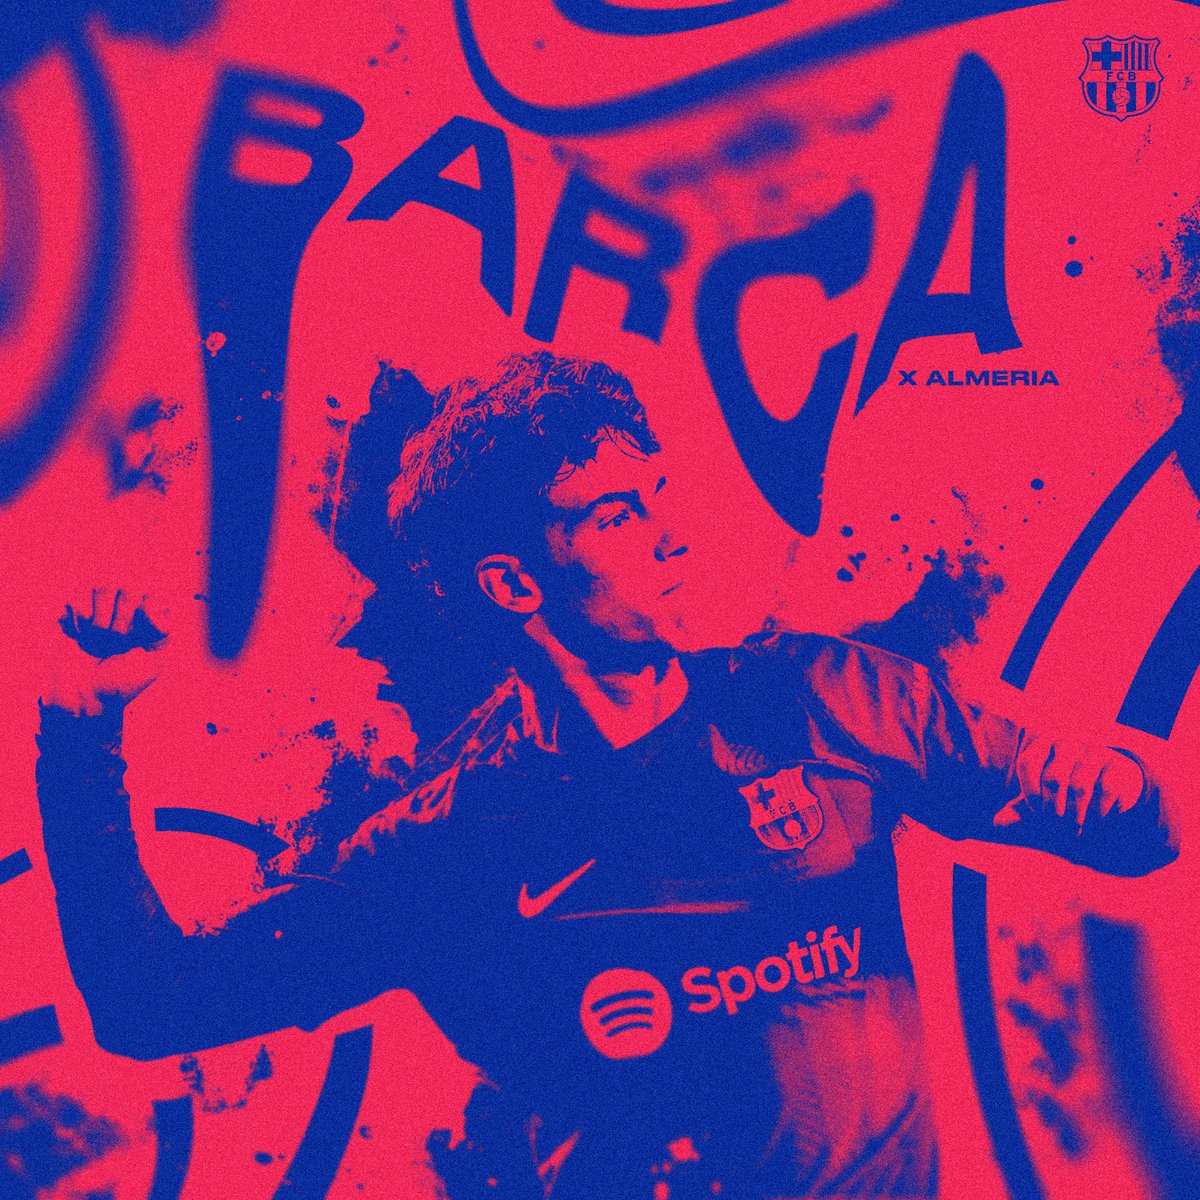 Day 20 of creating a matchday poster every day of December! Barca x Almeria